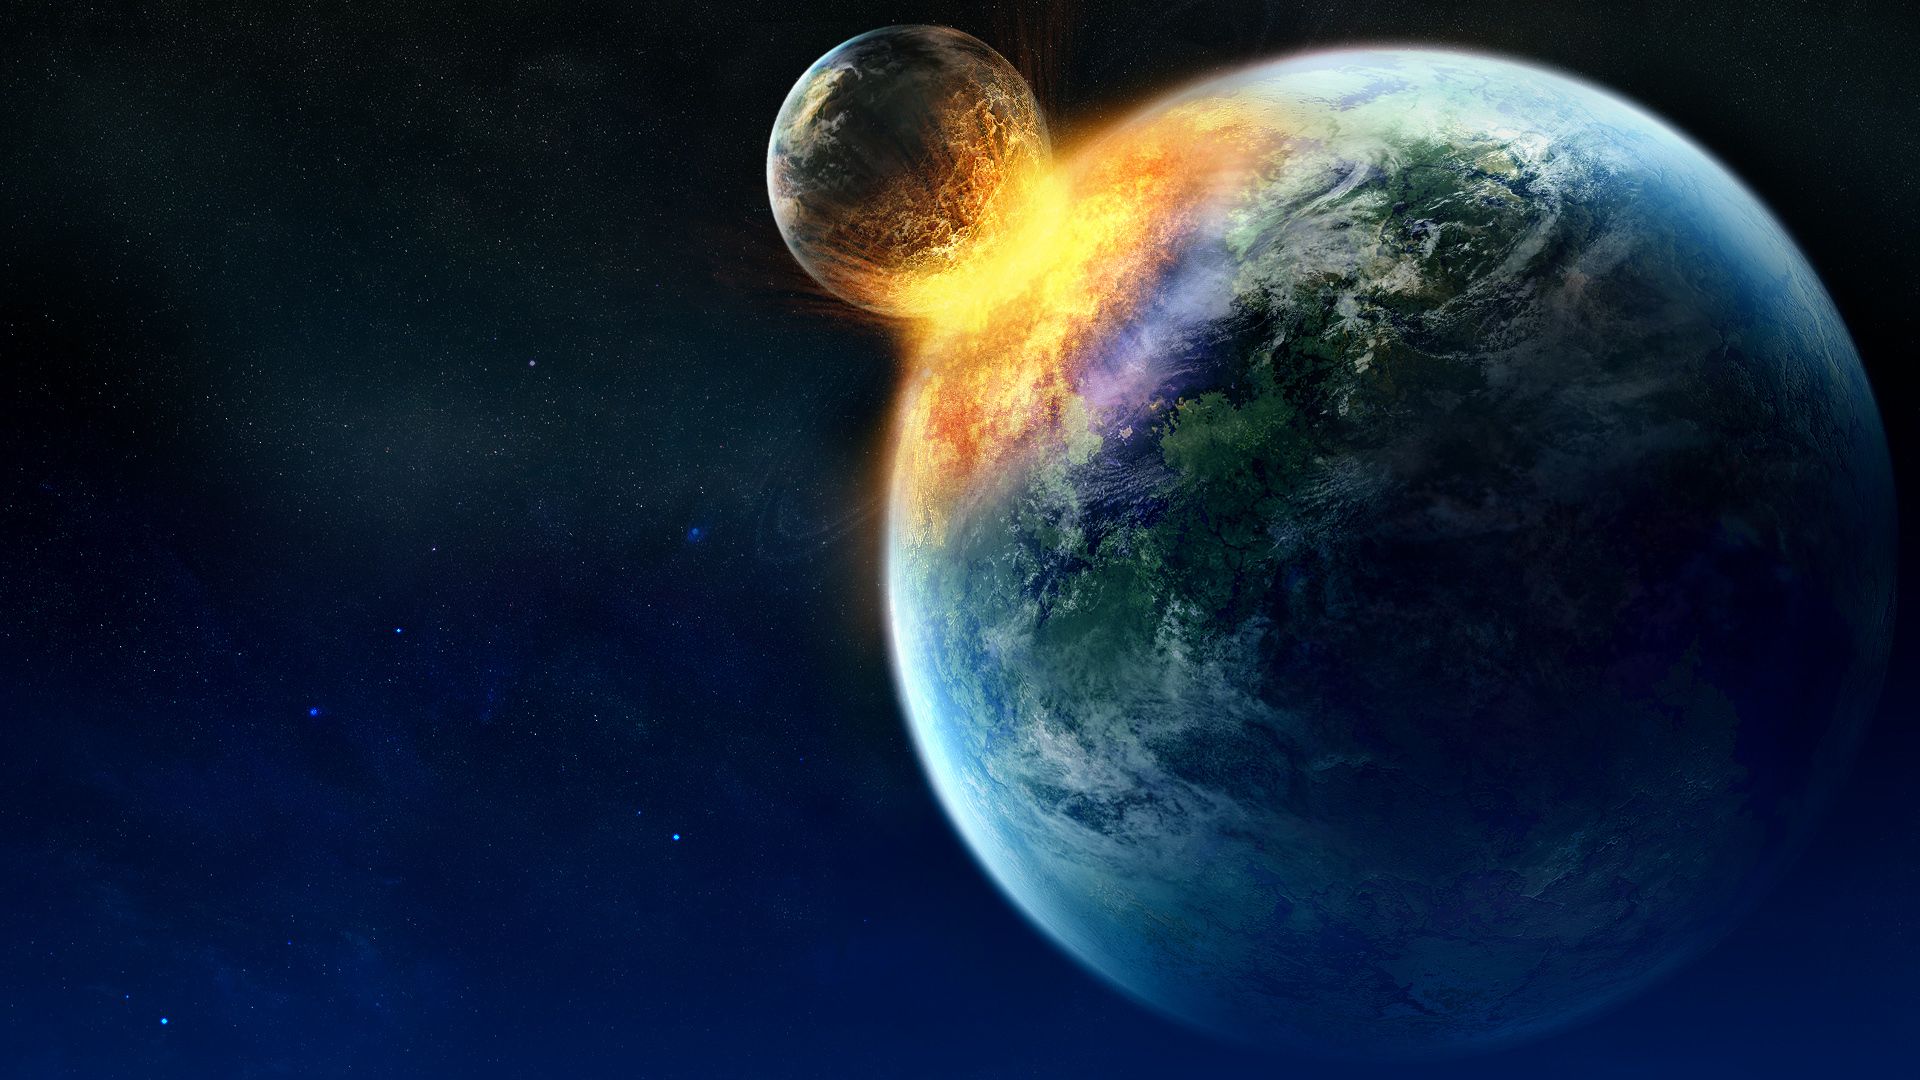 Disaster - Collision Of Two Planets - HD Wallpaper 